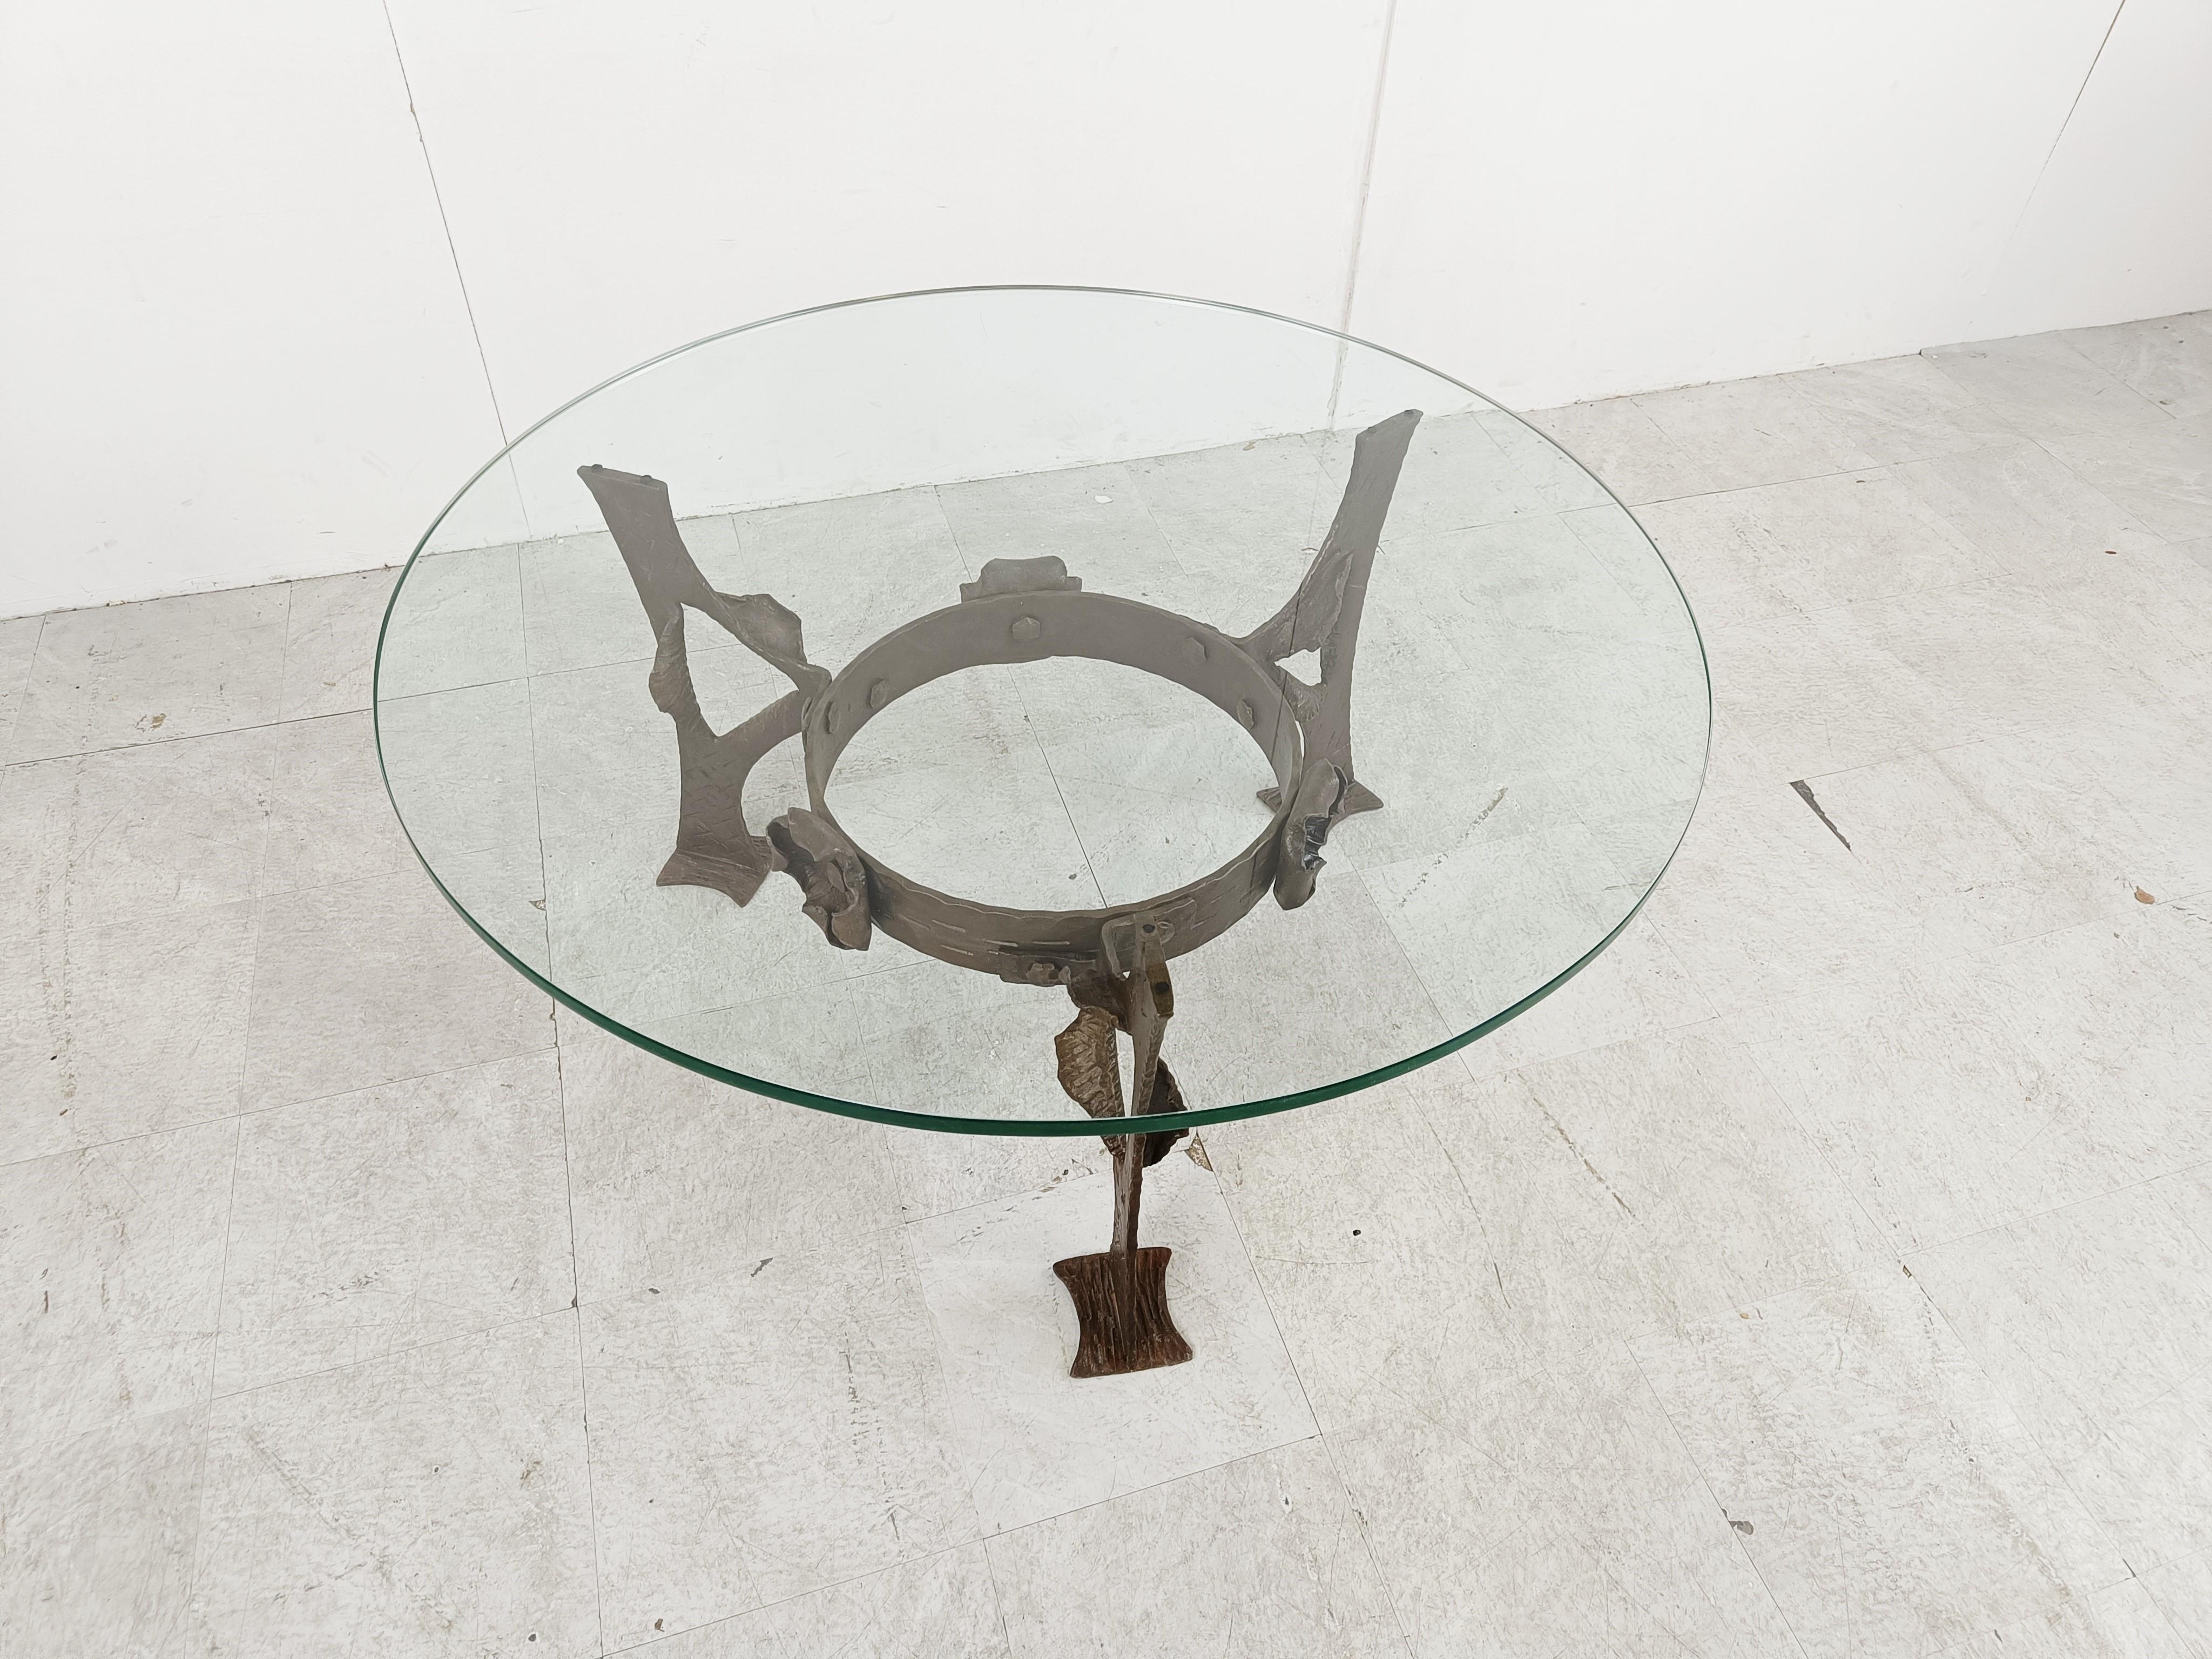 Beautiful sculpted flower cut steel brutalist coffee table with a clear round glass table top.

Striking brutalist design

Good condition

1970s - Germany

Dimensions:
Height: 54cm/21.25